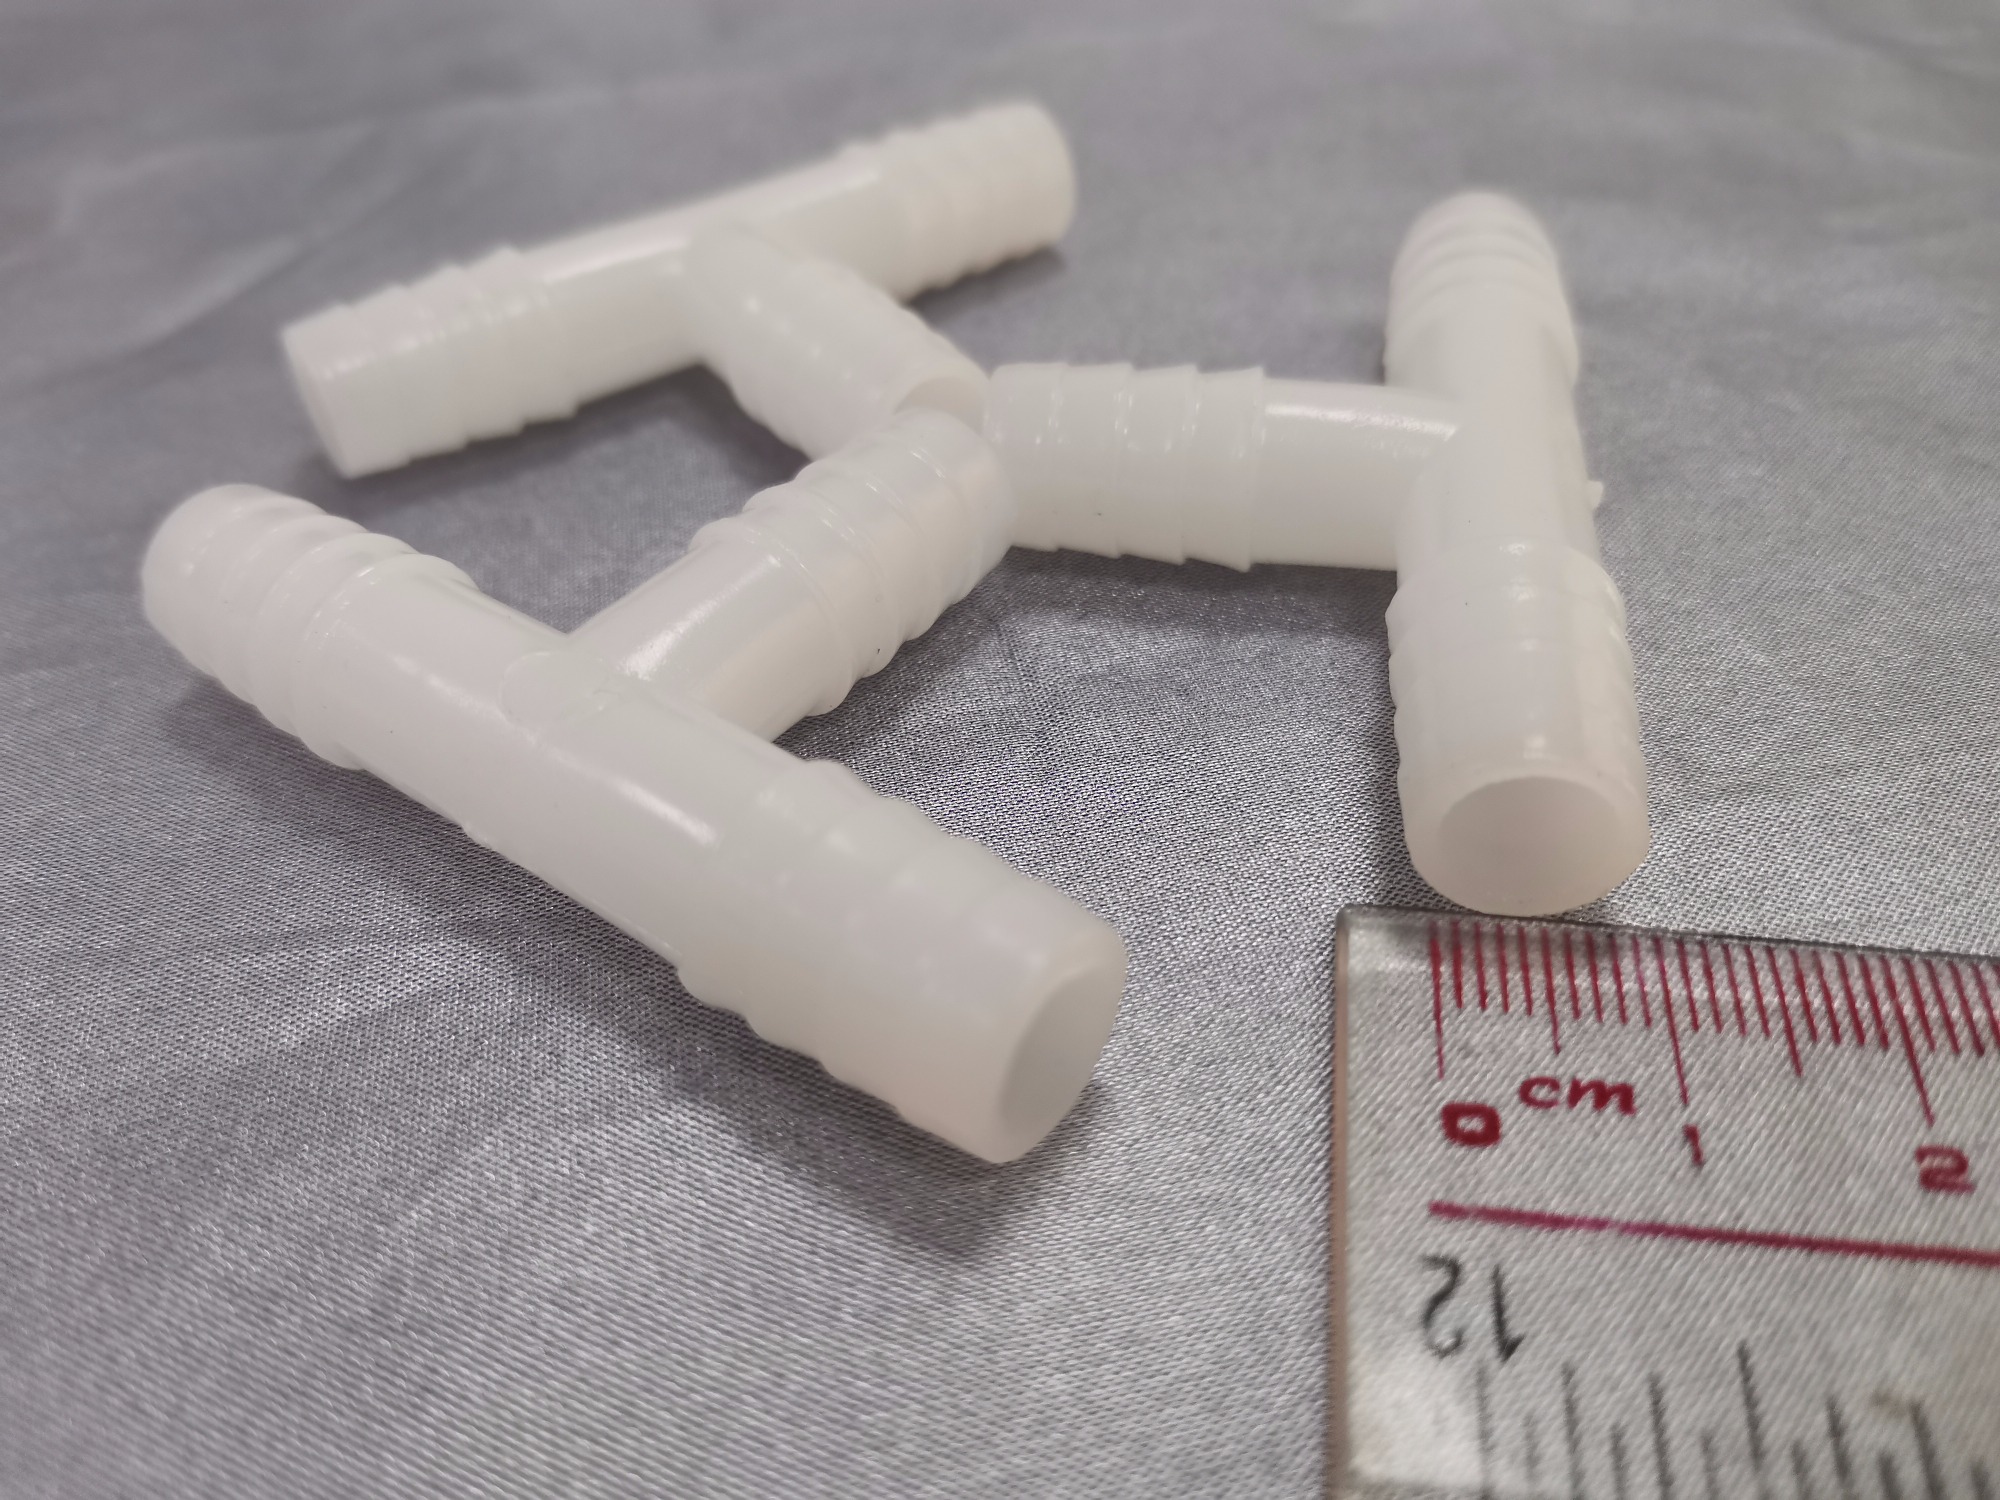 T-joint and resin tube widing tube for vaccum infusion accessories